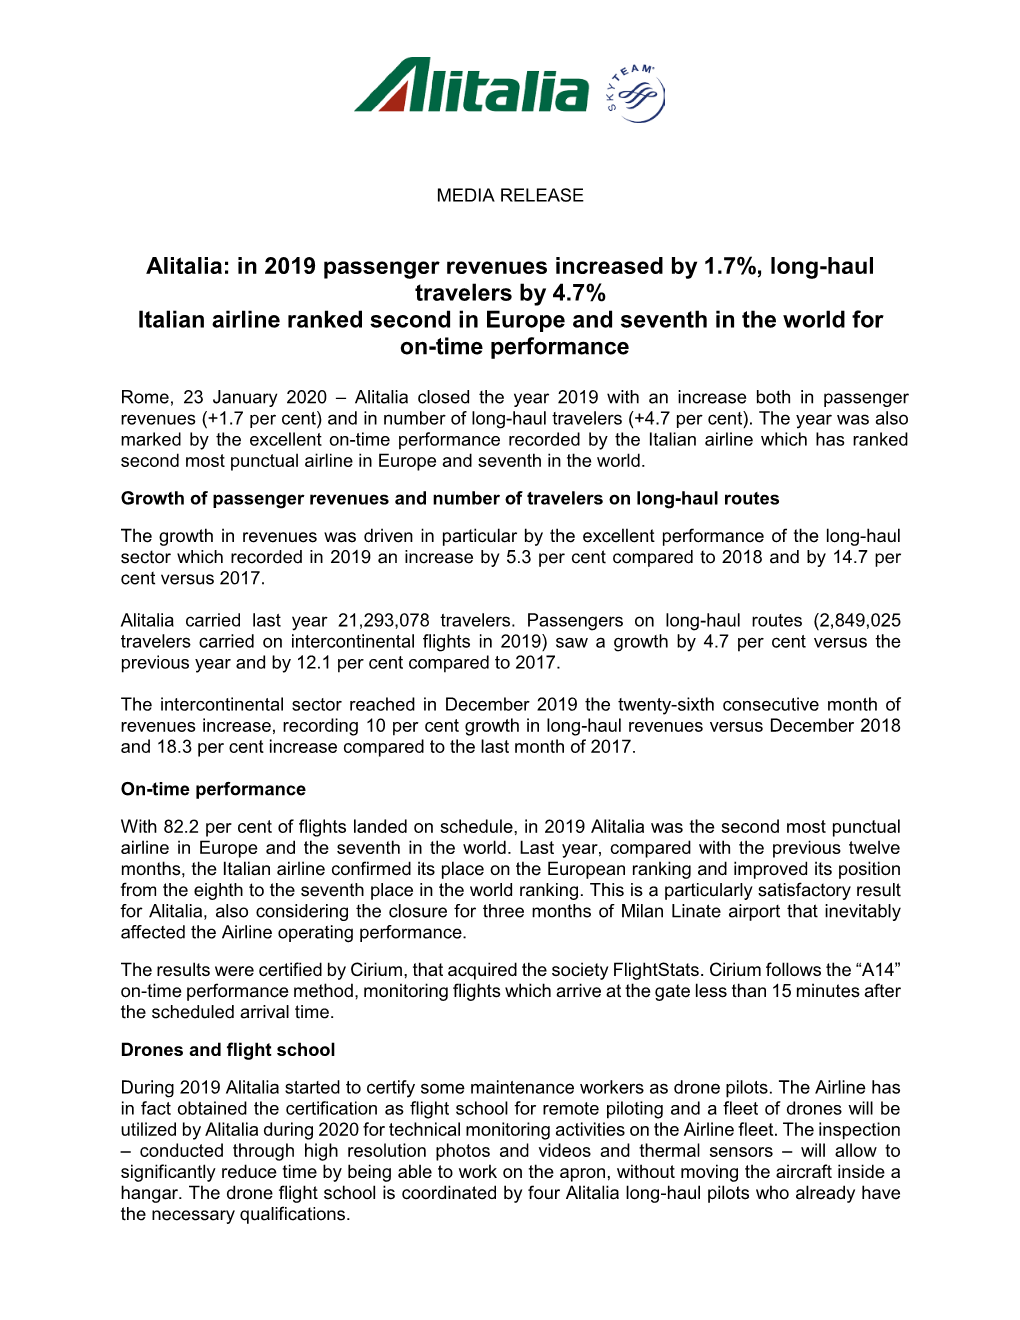 In 2019 Passenger Revenues Increased by 1.7%, Long-Haul Travelers by 4.7% Italian Airline Ranked Second in Europe and Seventh in the World for On-Time Performance